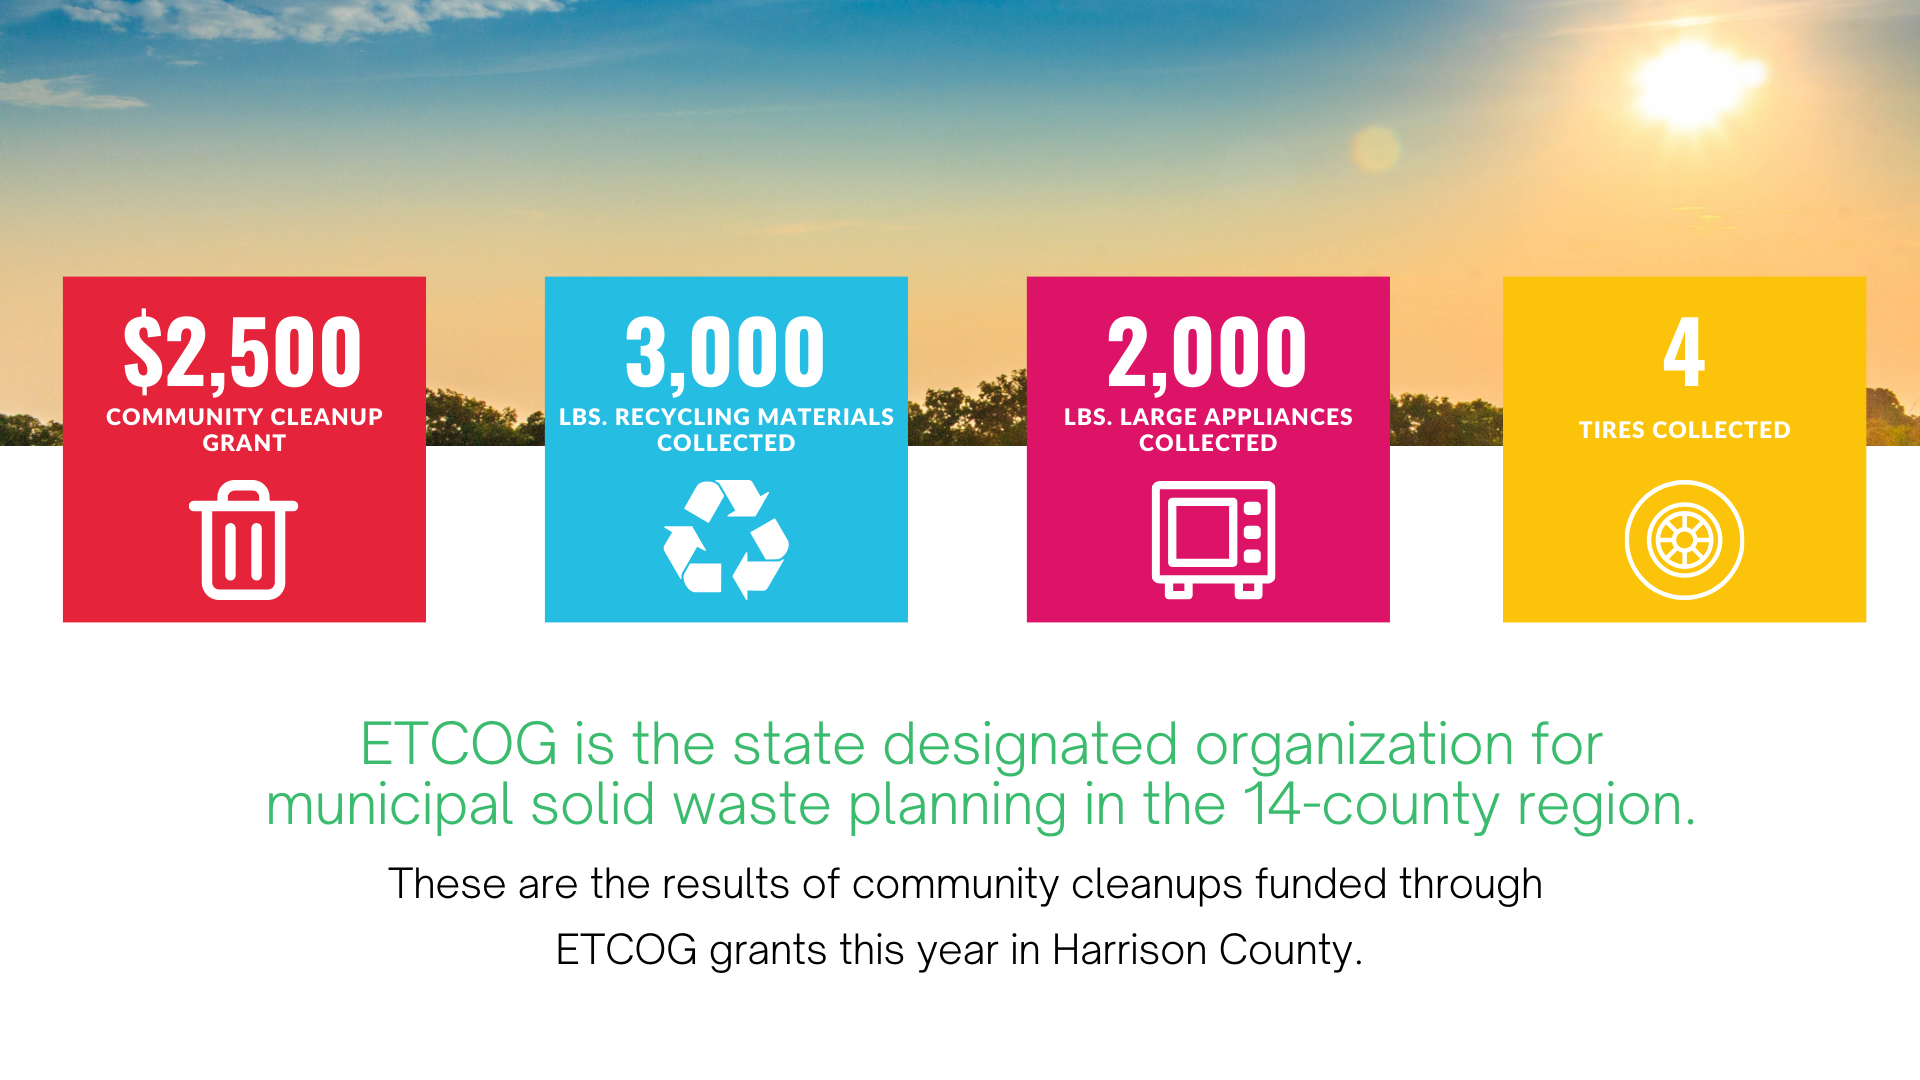 A poster for the state designated organization for municipal solid waste planning in the 14 county region.